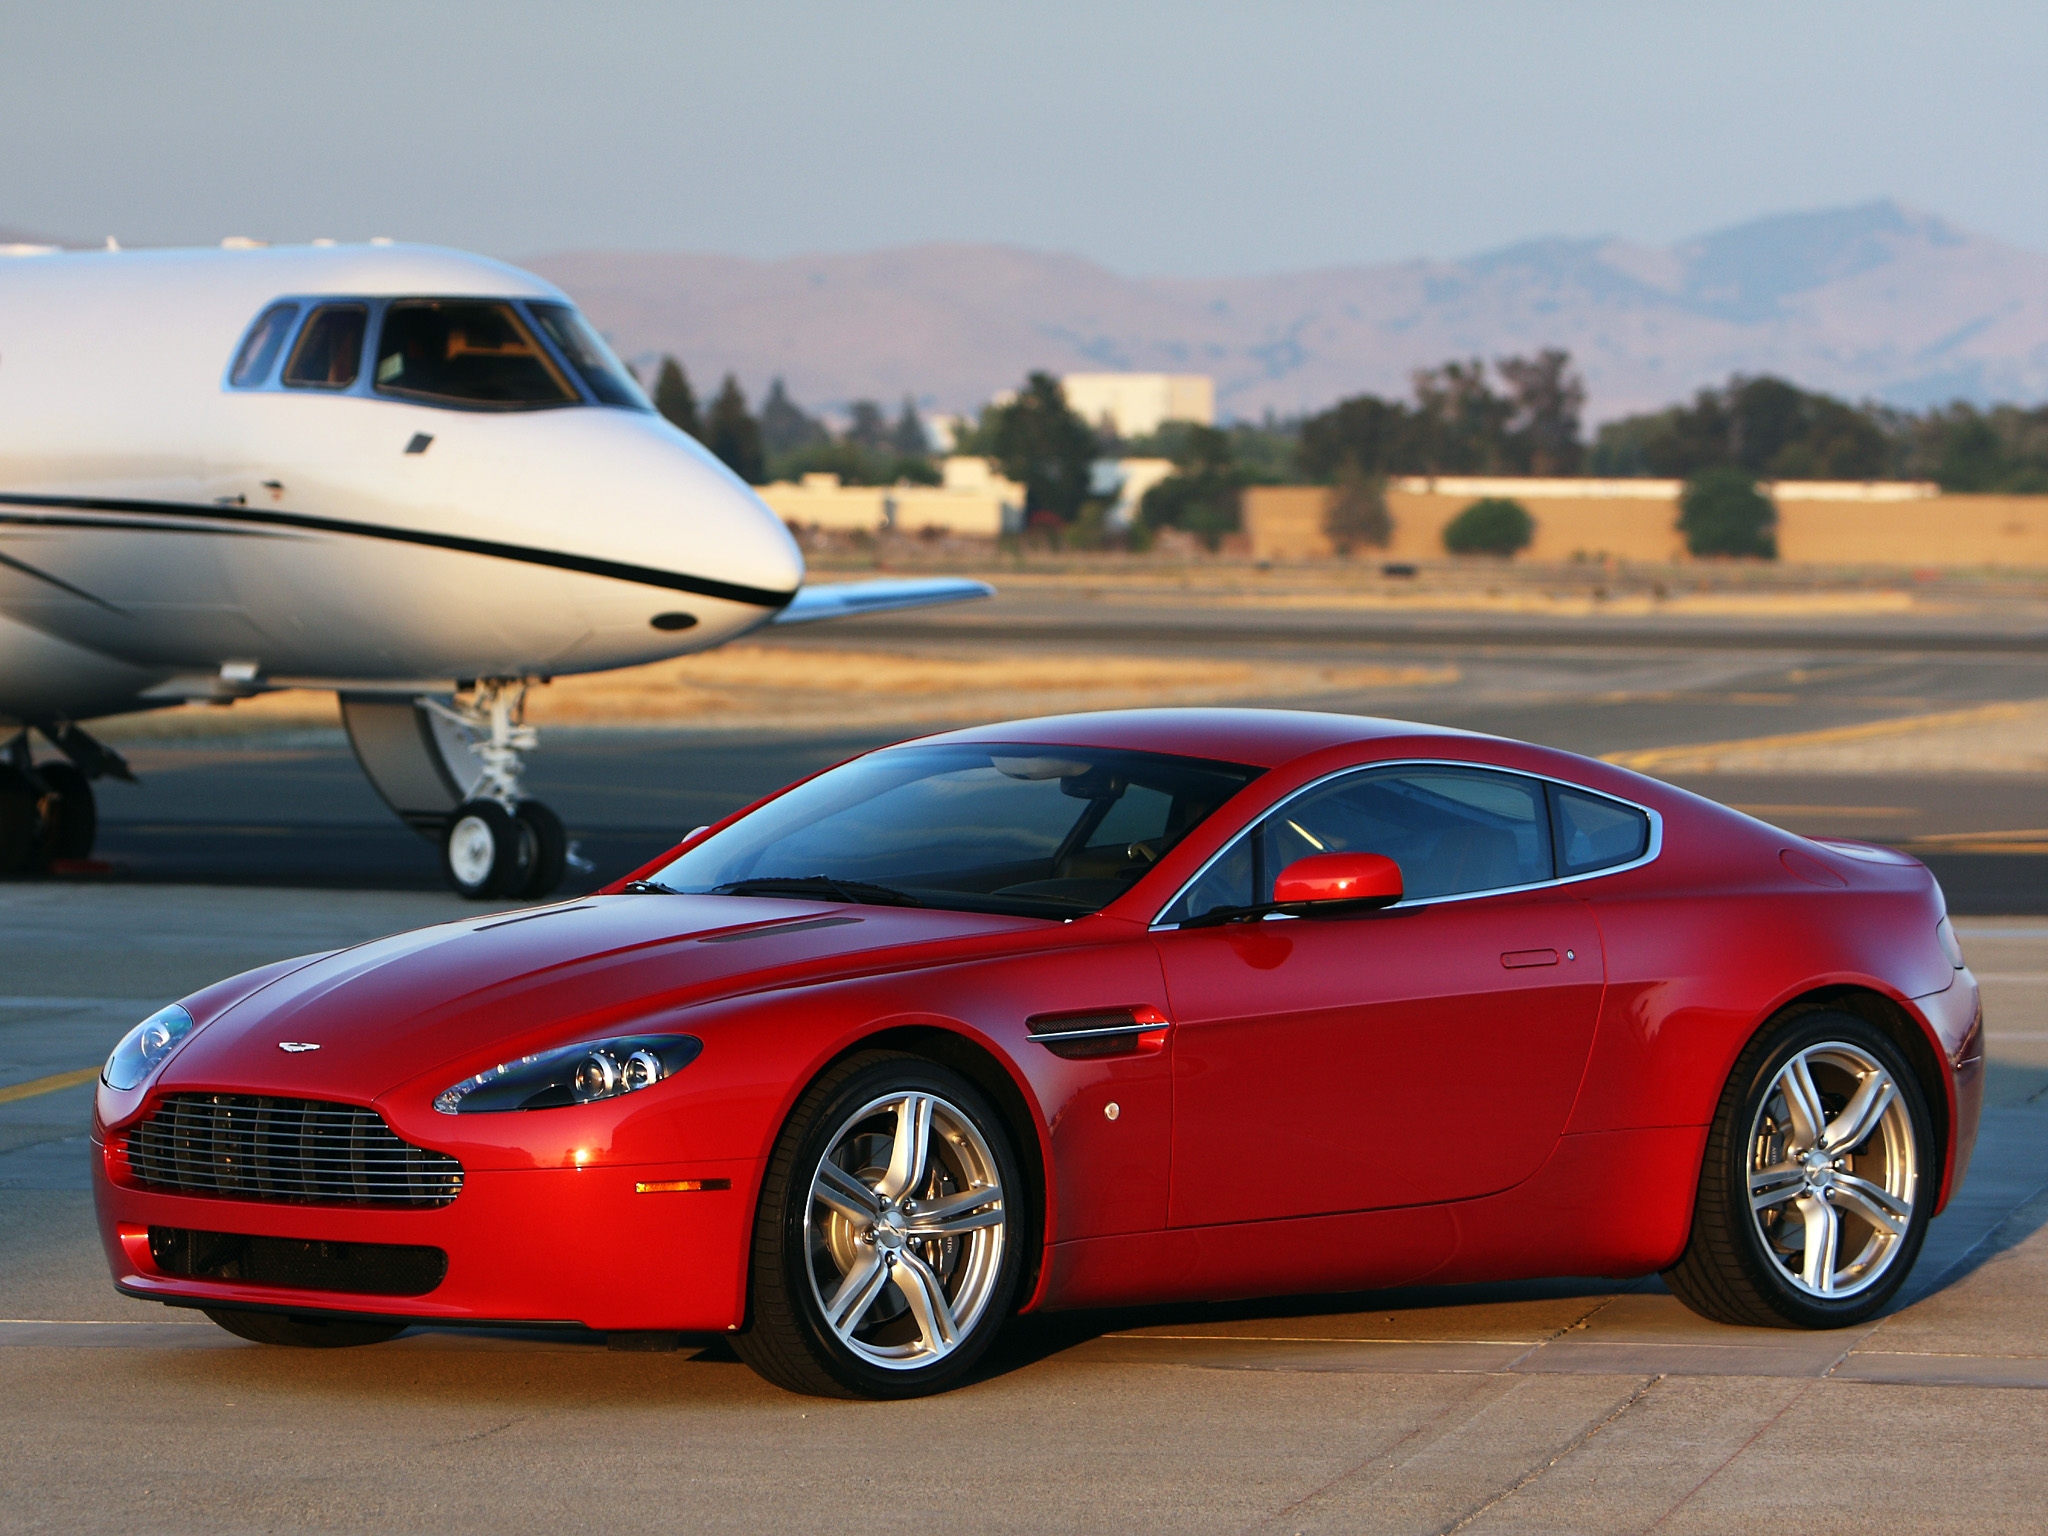 aston martin, plane, cars, red, side view, airplane, style, 2008, v8, vantage